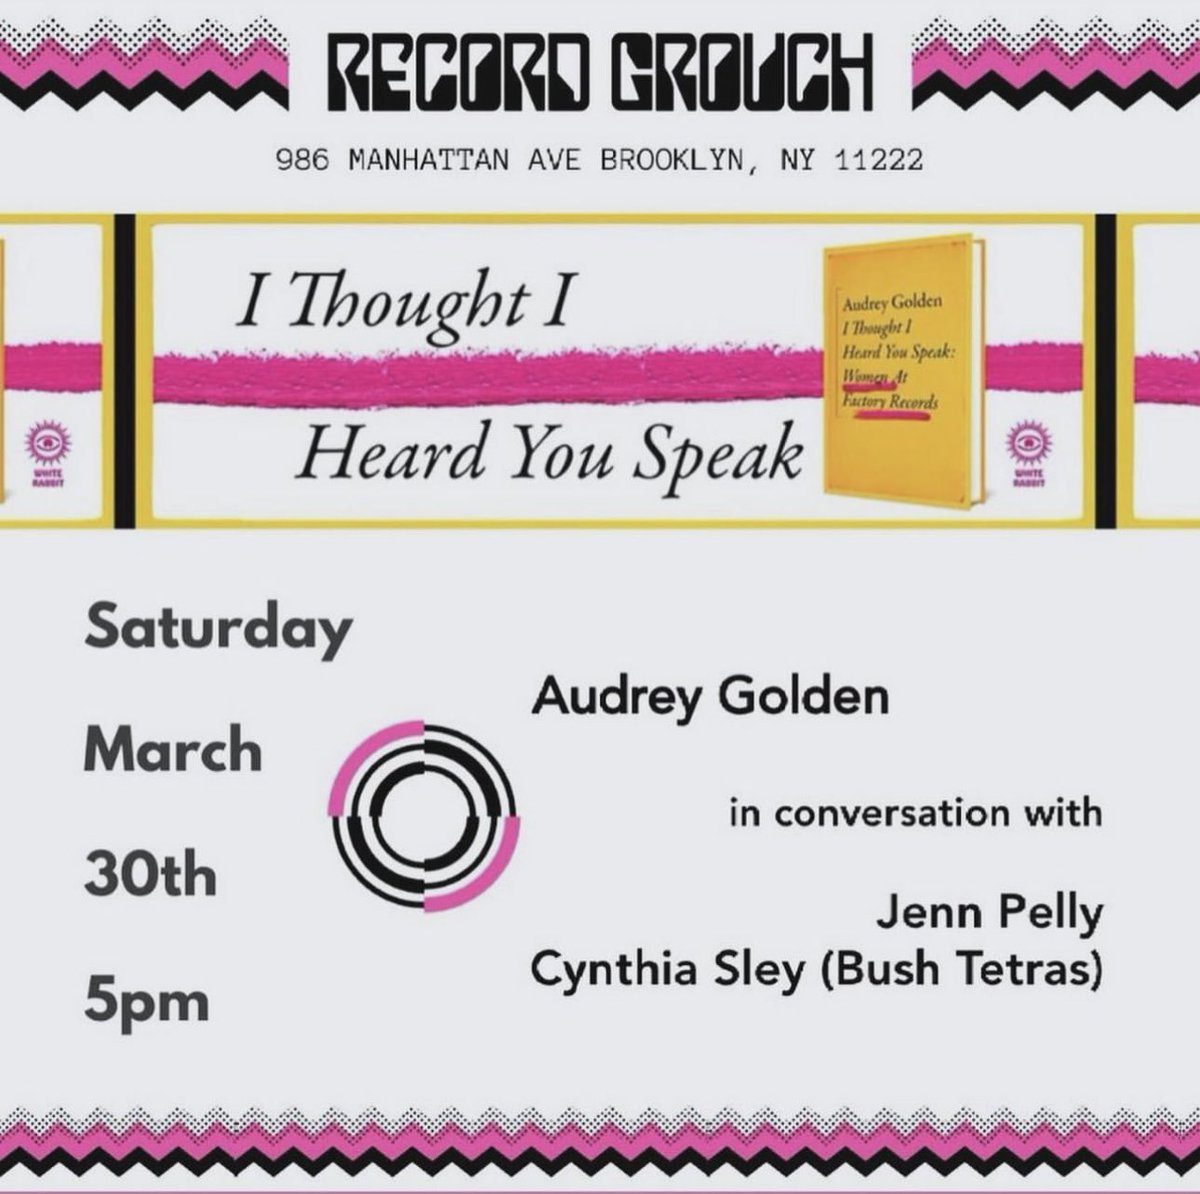 New York! THIS SATURDAY @RecordGrouch! I’ll be in conversation with @jennpelly + Cynthia Sley of @bushtetrasnyc. Join us at 5pm in Greenpoint! Tell yr friends! @WhiteRabbitBks @HachetteUS